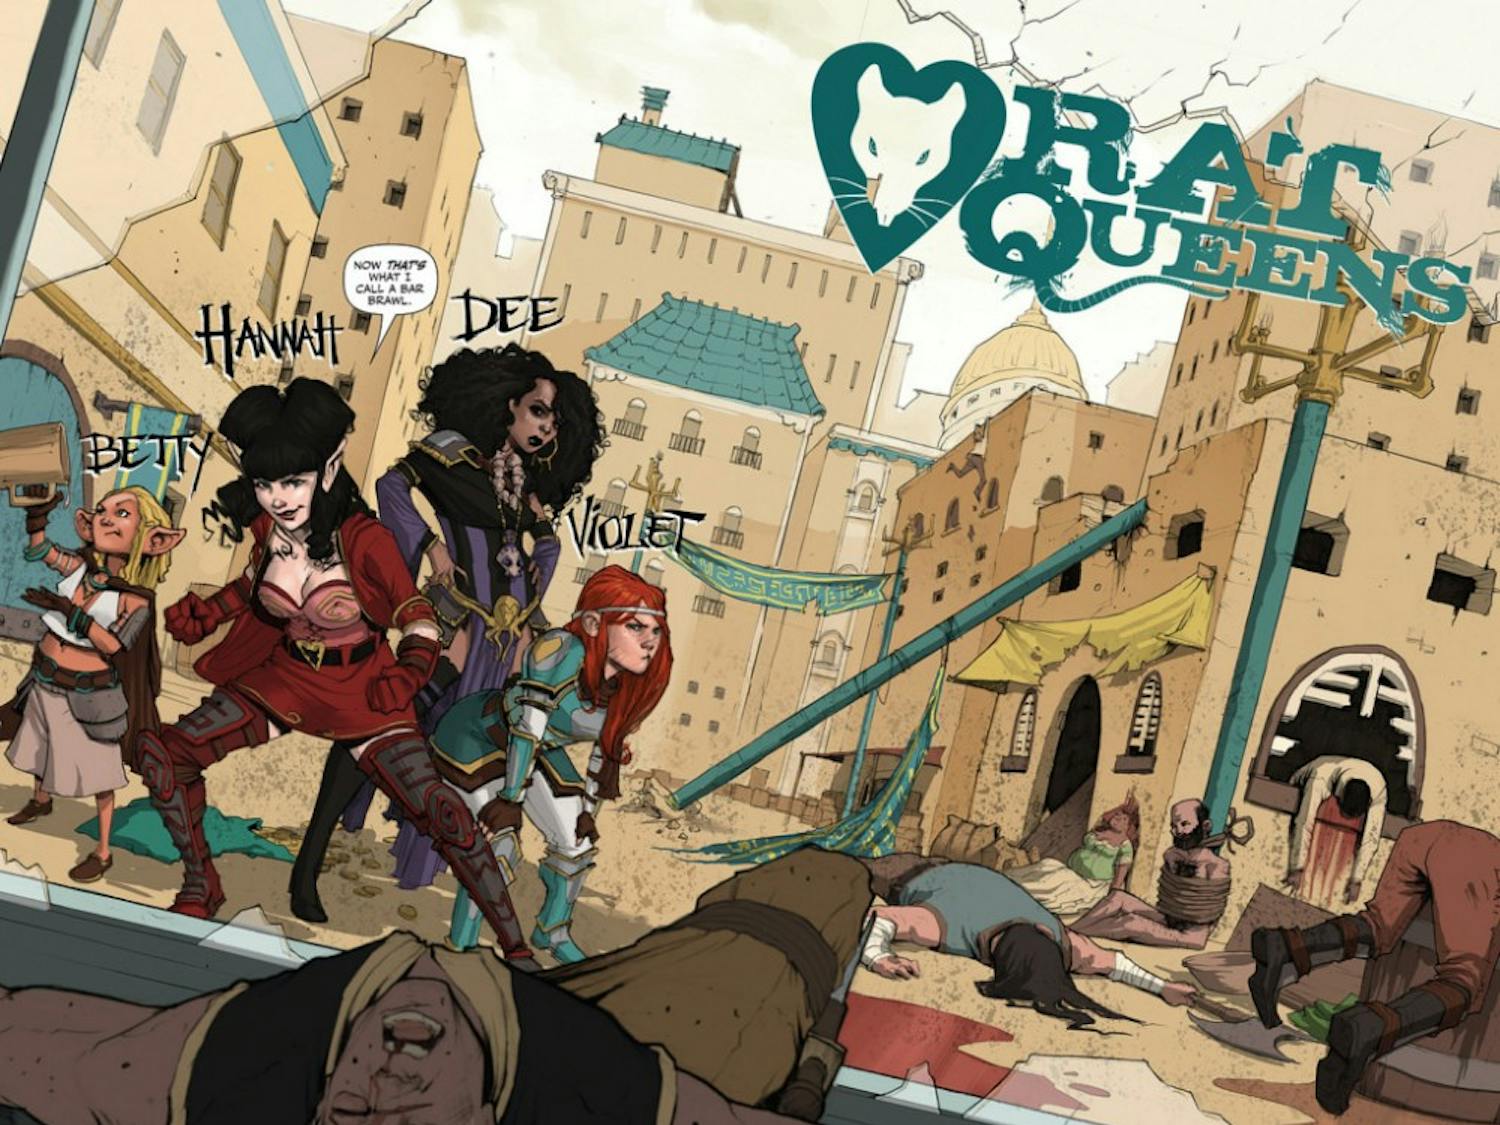 "Rat Queens"&nbsp;revolves around a group of foul-mouthed female mercenaries.&nbsp;